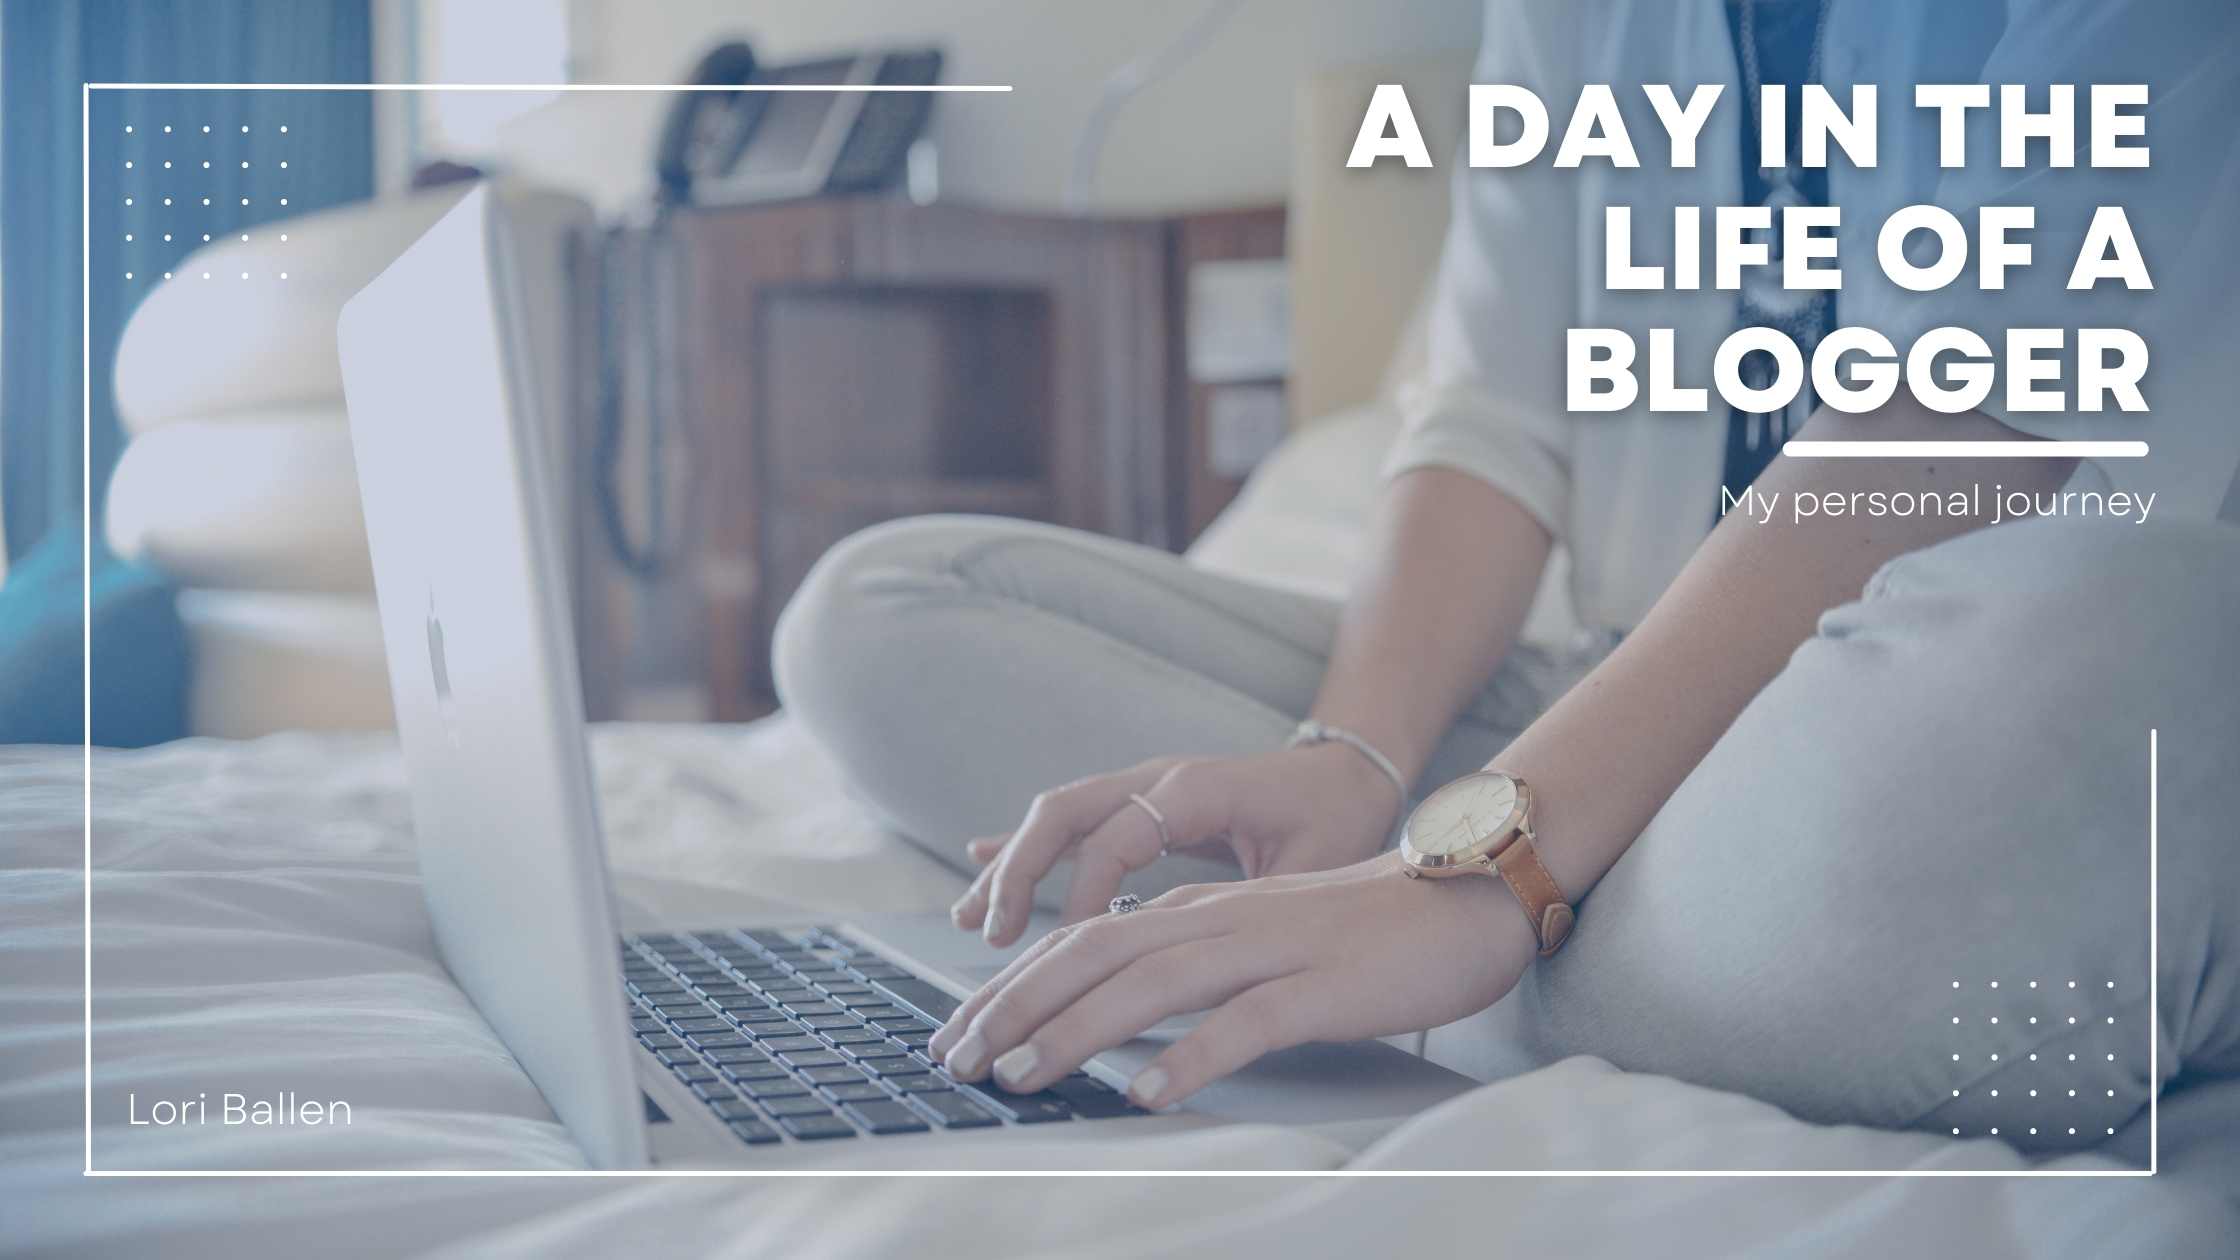 Hi. I'm Lori Ballen. I'm a full-time blogger. In this article, I'll share a day in the life of a blogger.